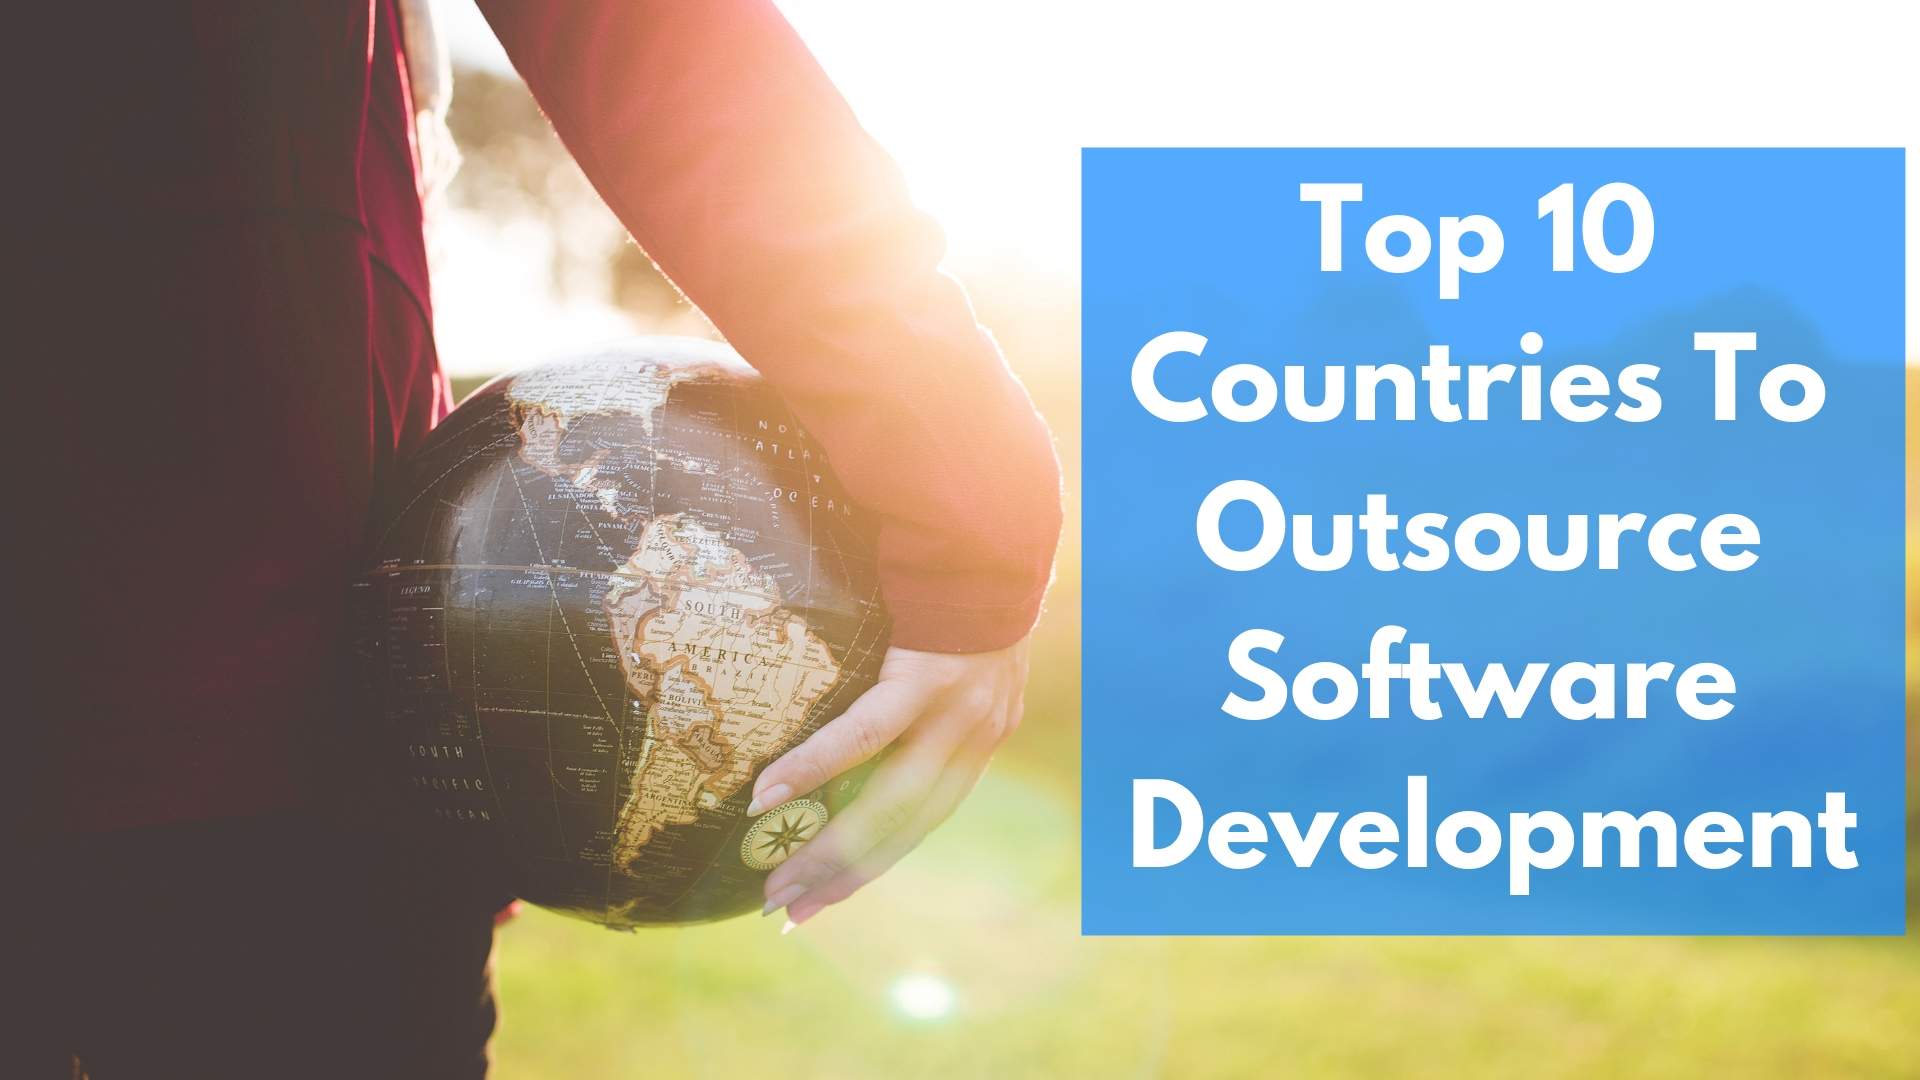 Top 10 Countries To Outsource Software Development - Poster - HD Wallpaper 